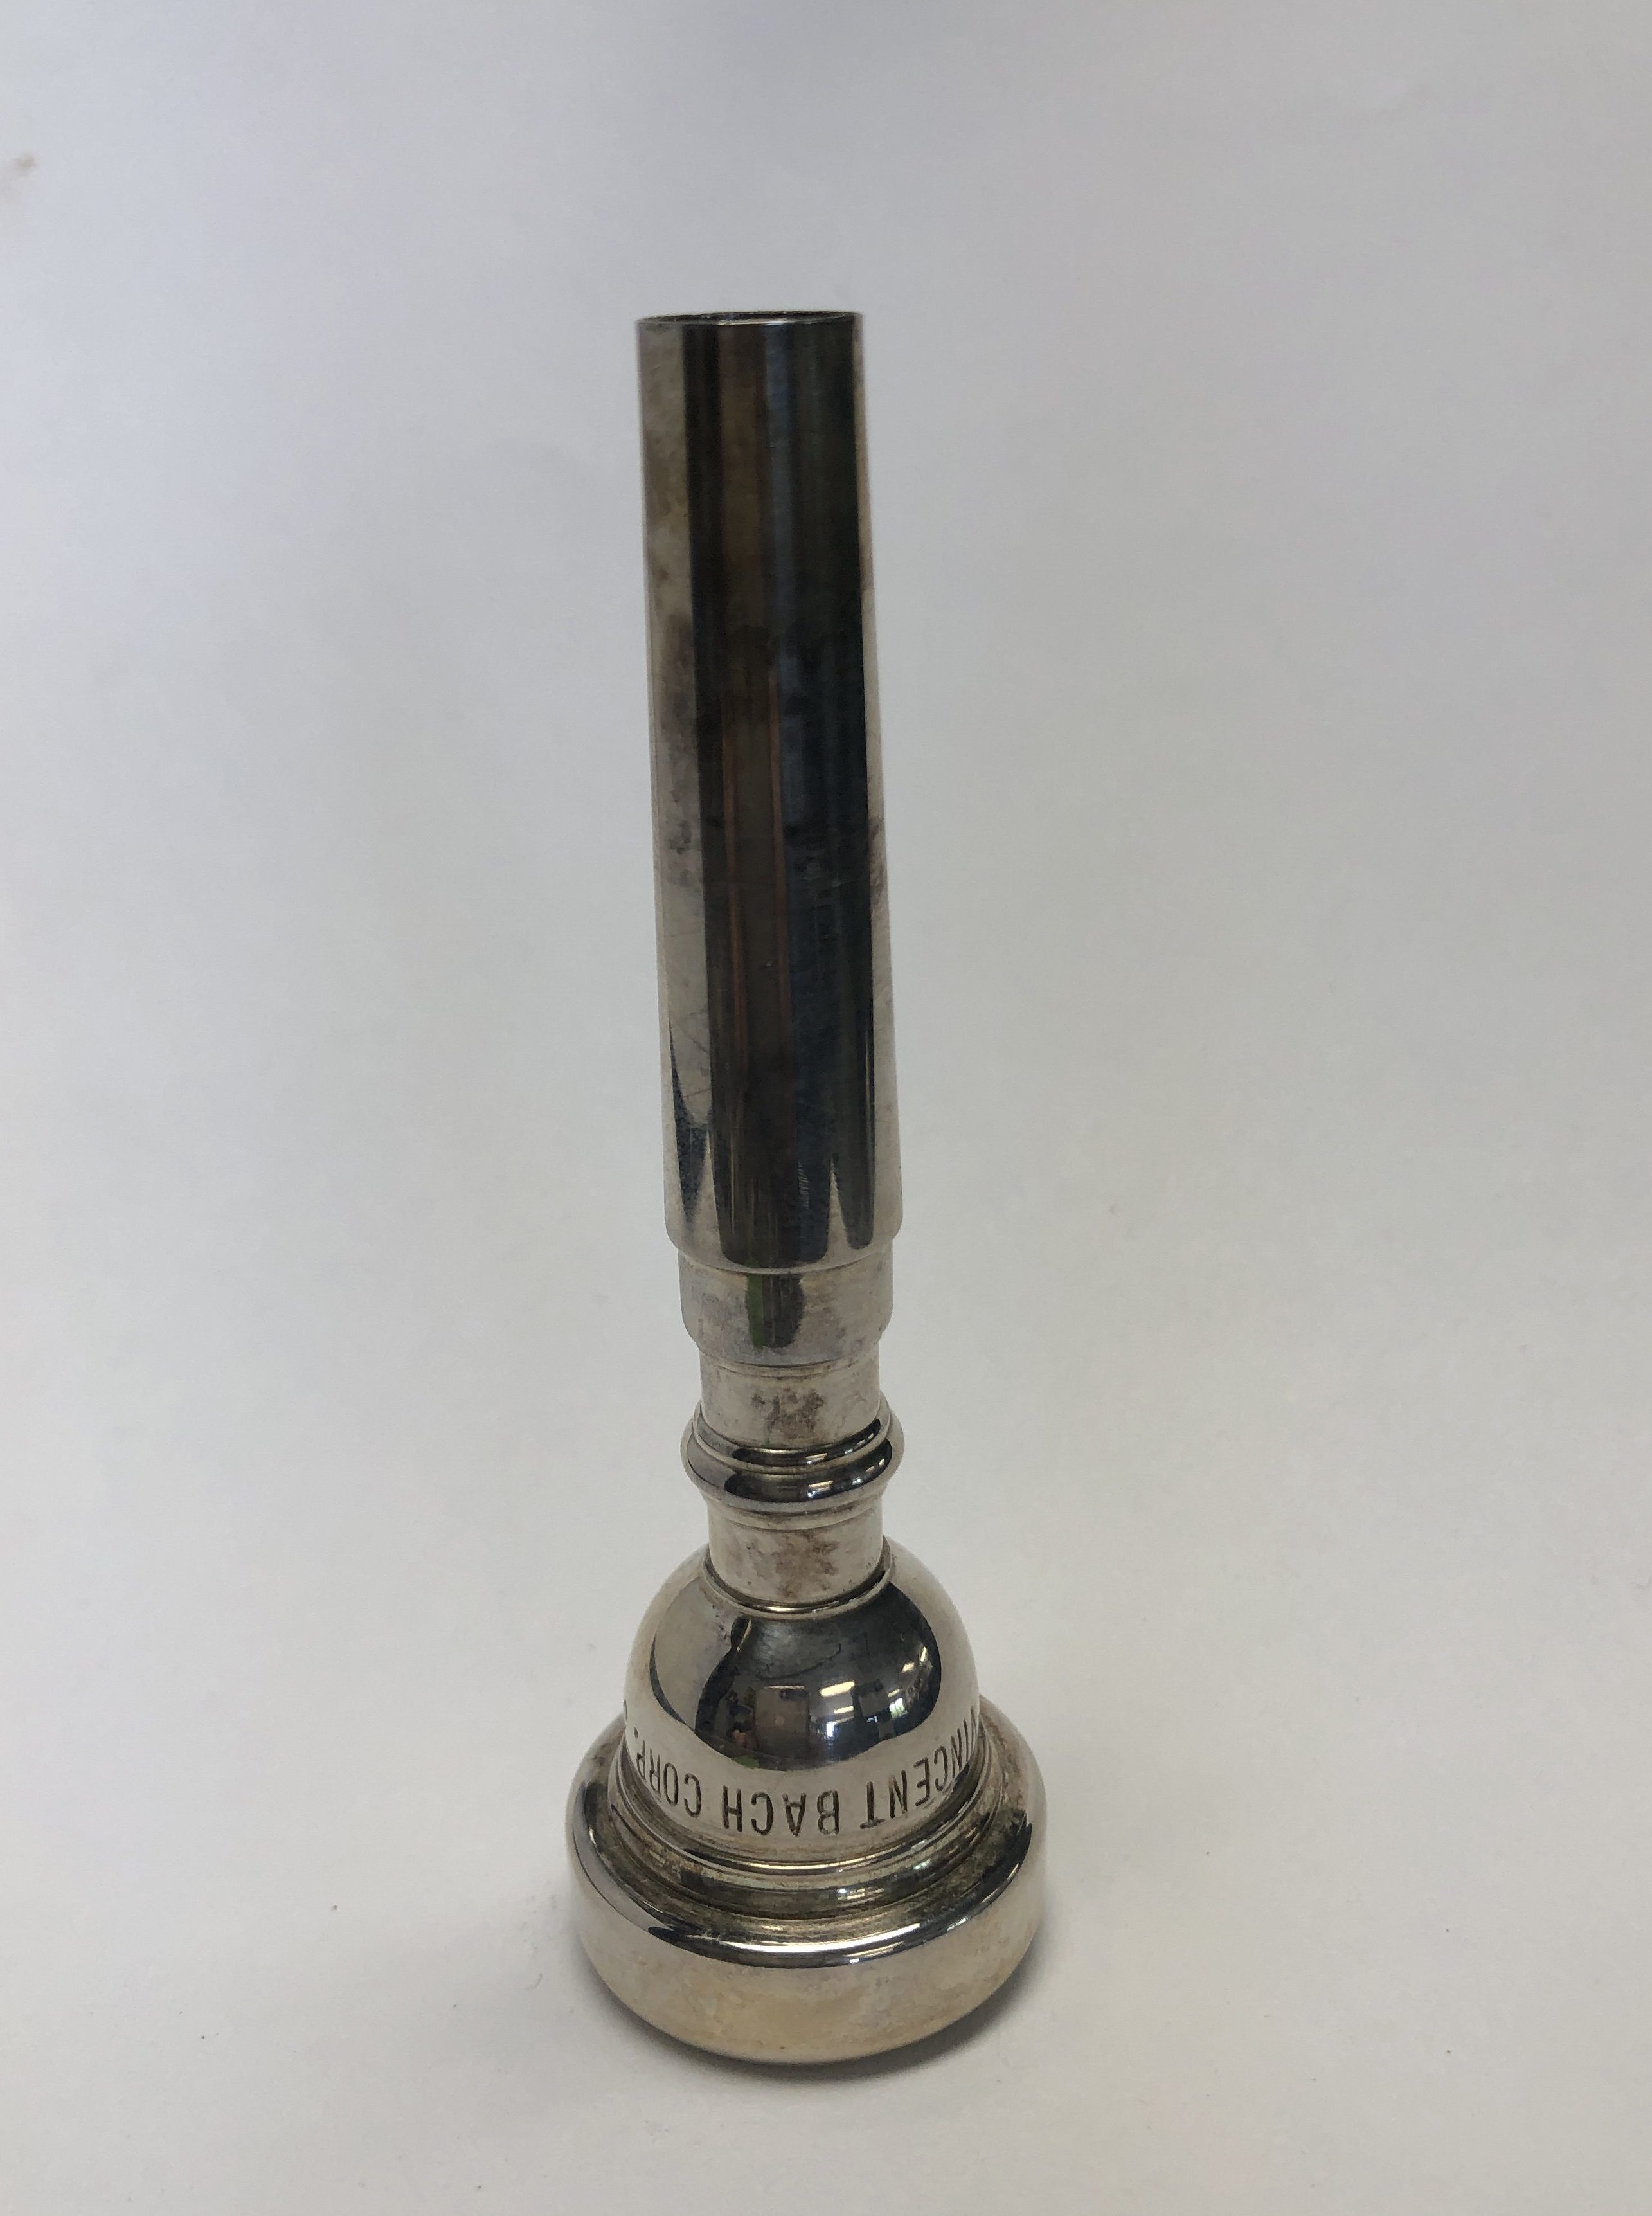 Used Monette Prana B2S4 Trumpet Mouthpiece for Sale - The Brass